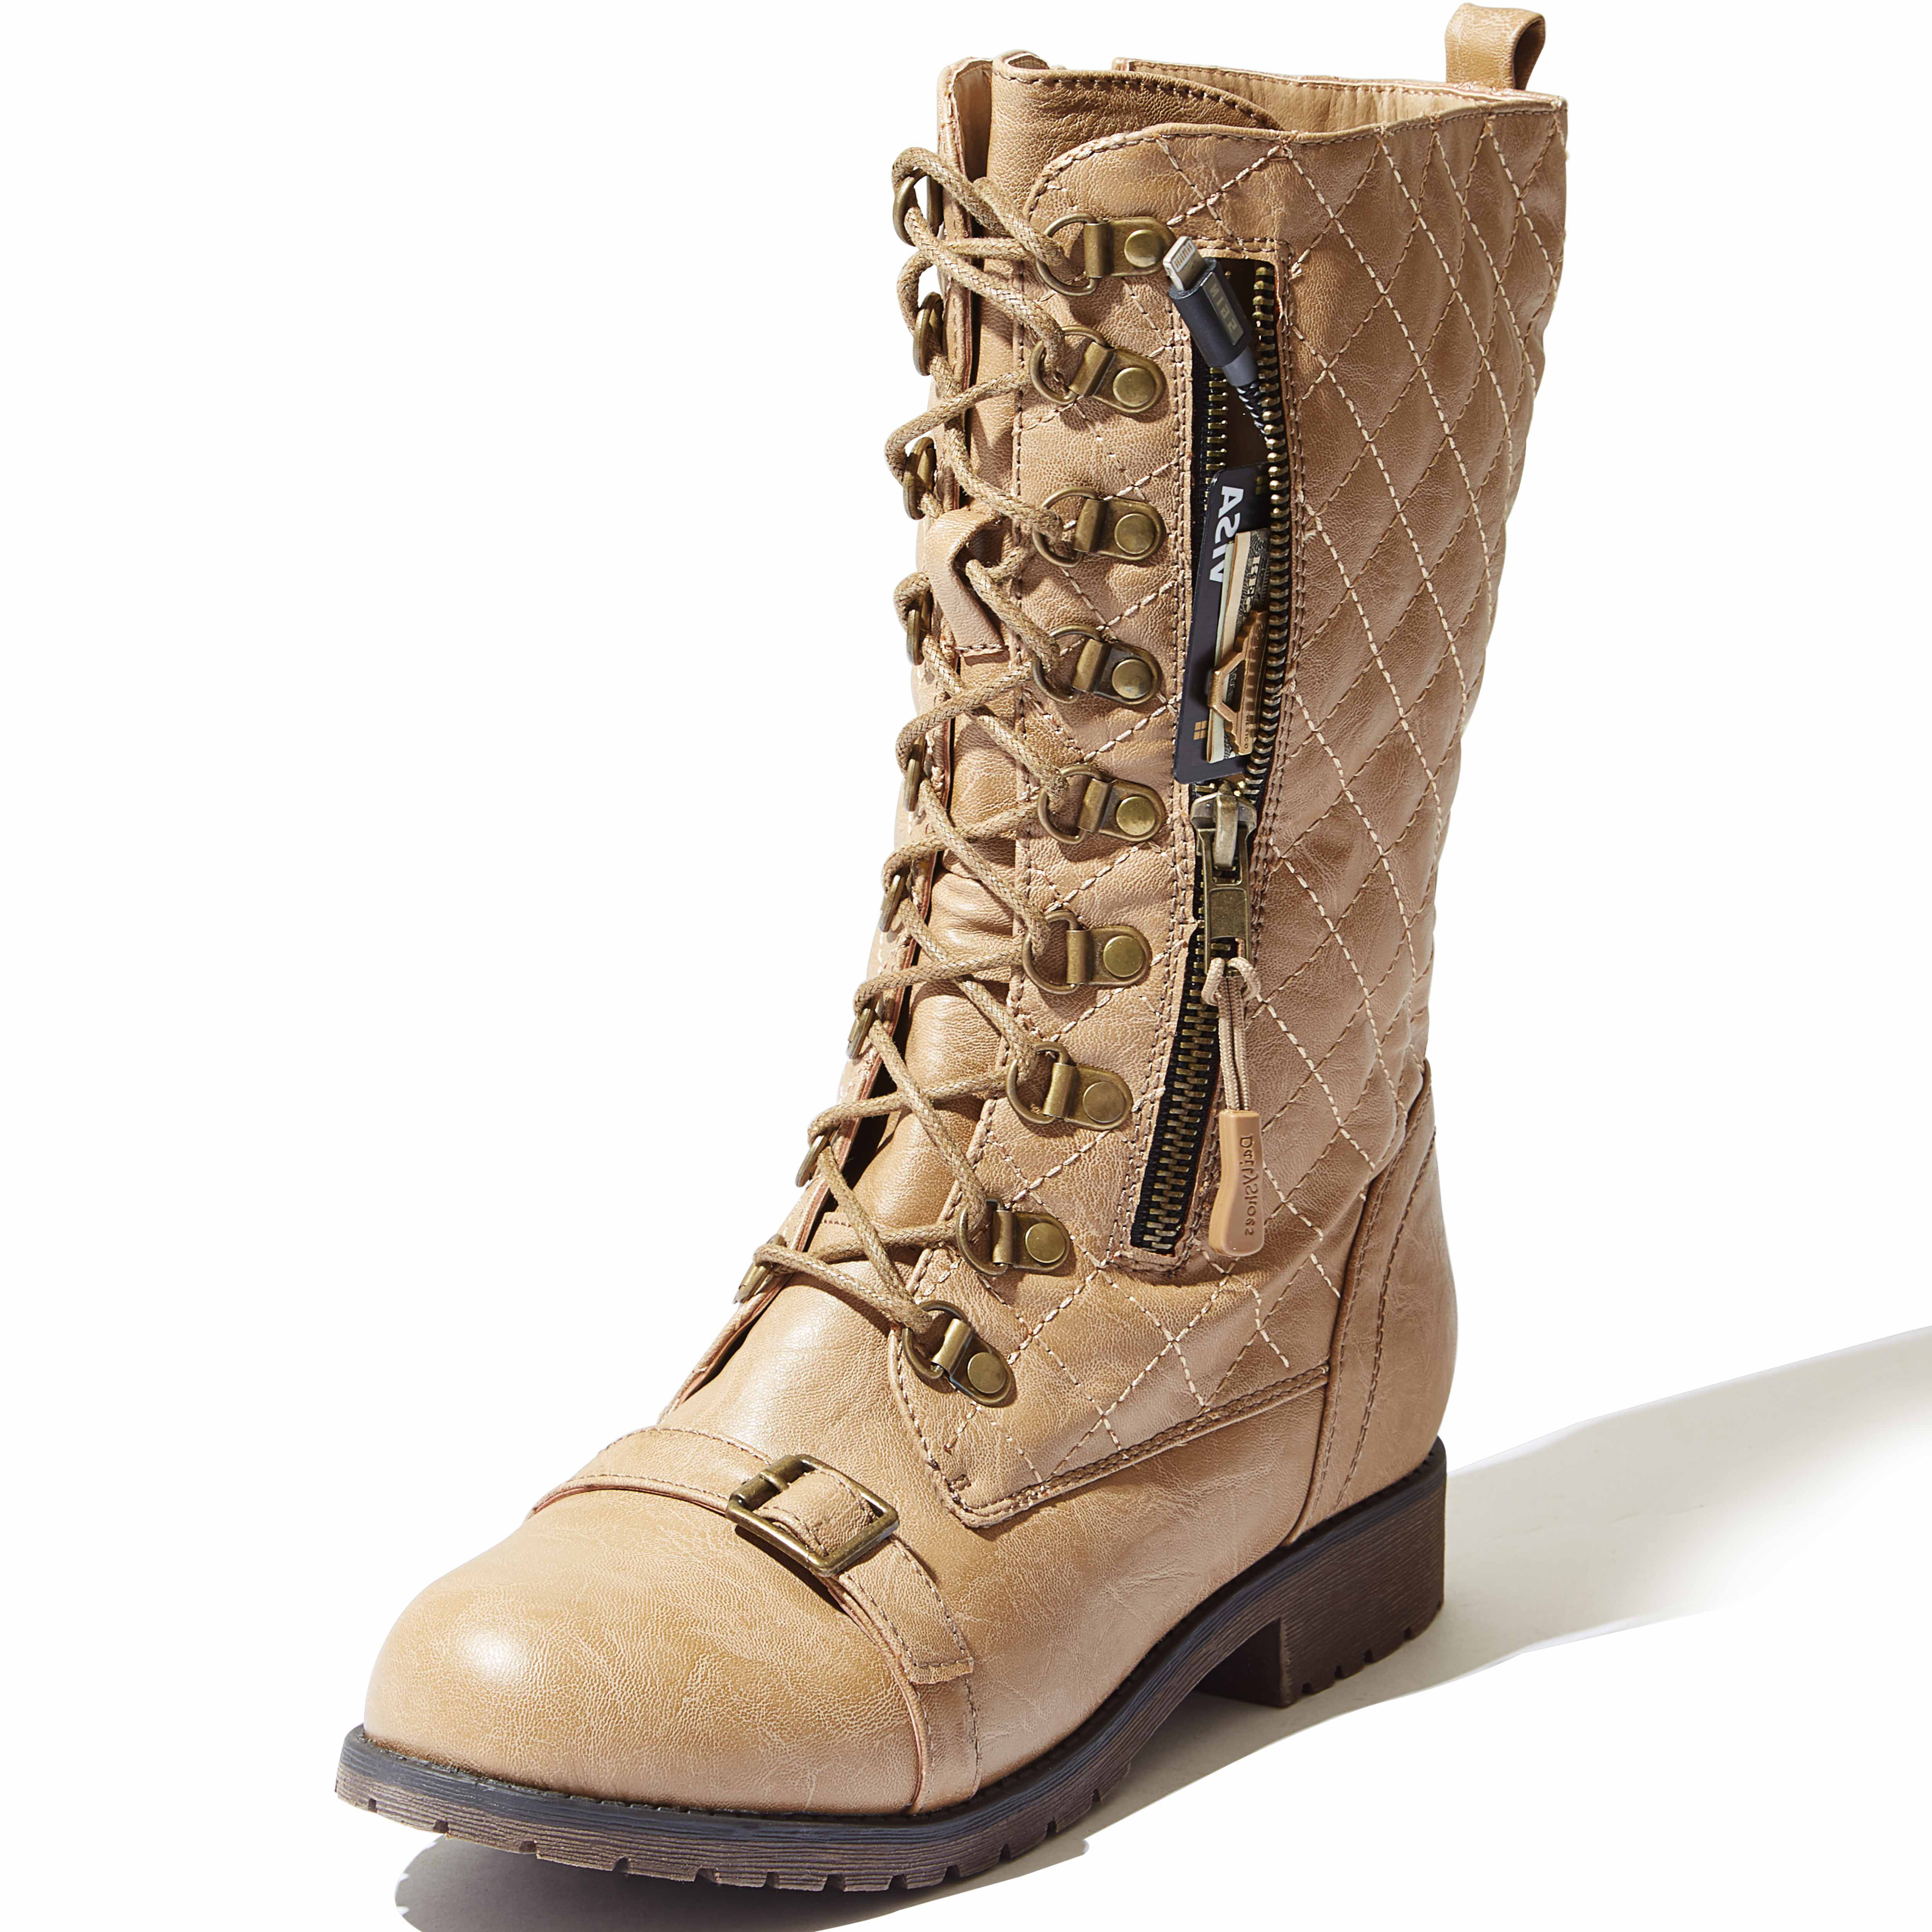 7.5 B Slim Tan M DailyShoes Womens Military Lace Up Buckle Combat Boots Mid Knee High Exclusive Credit Card Pocket